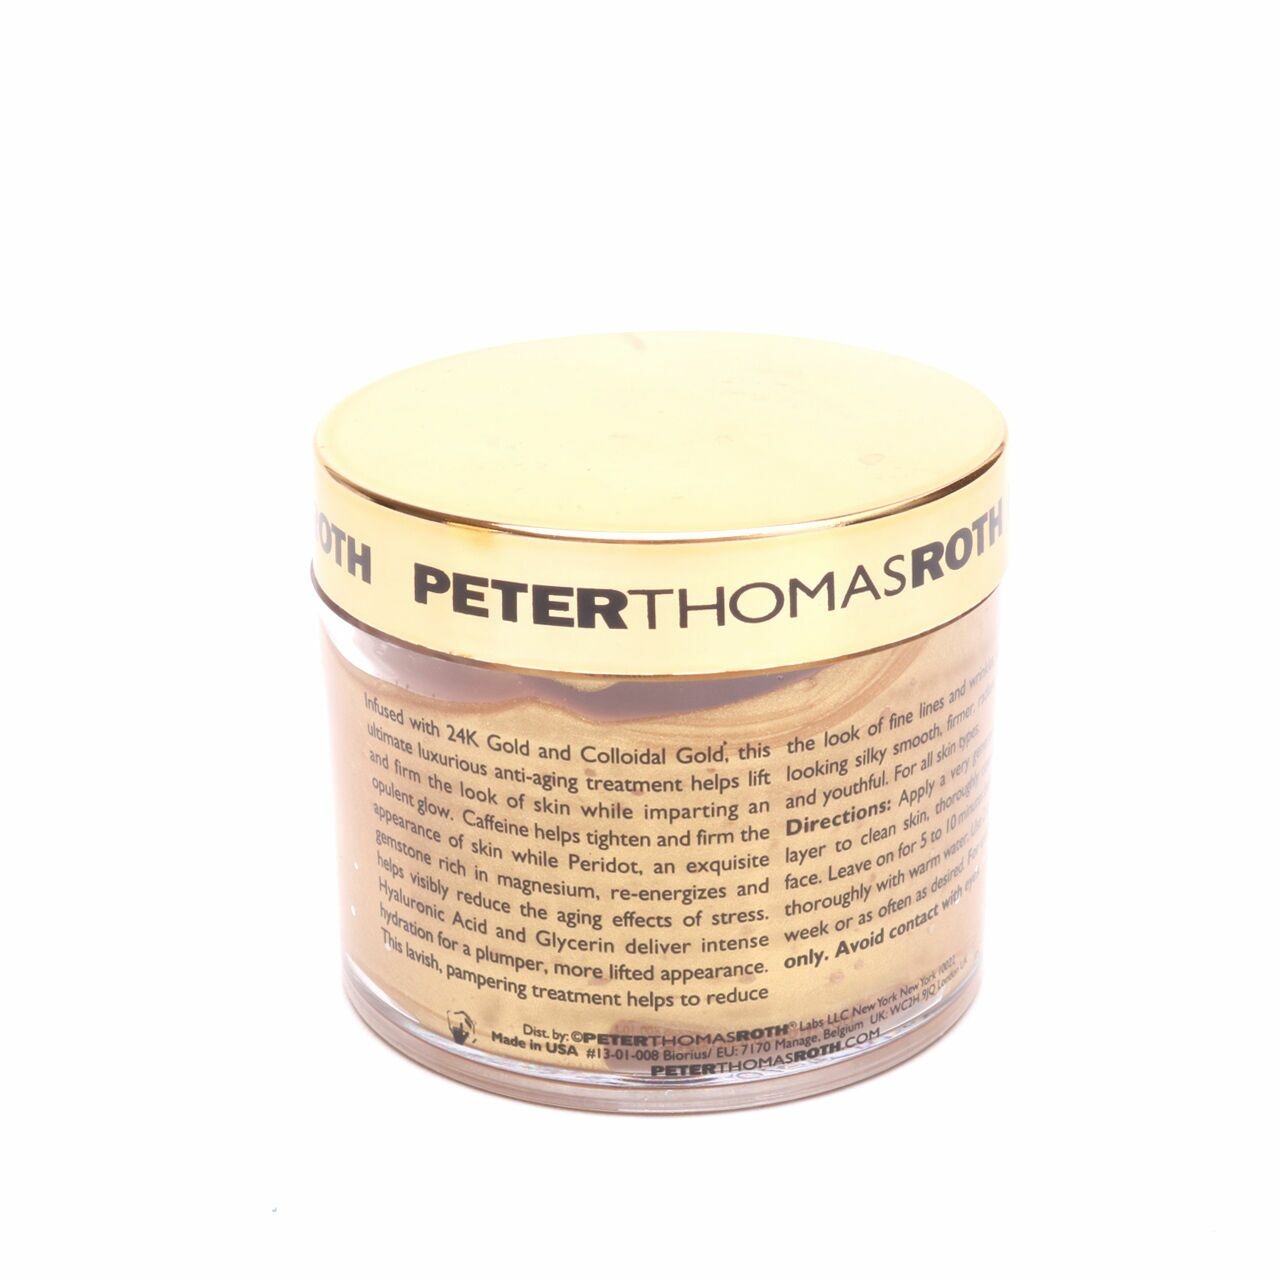 peter thomas roth 24K Gold Mask Pure Luxury Lift & Firm Mask Faces